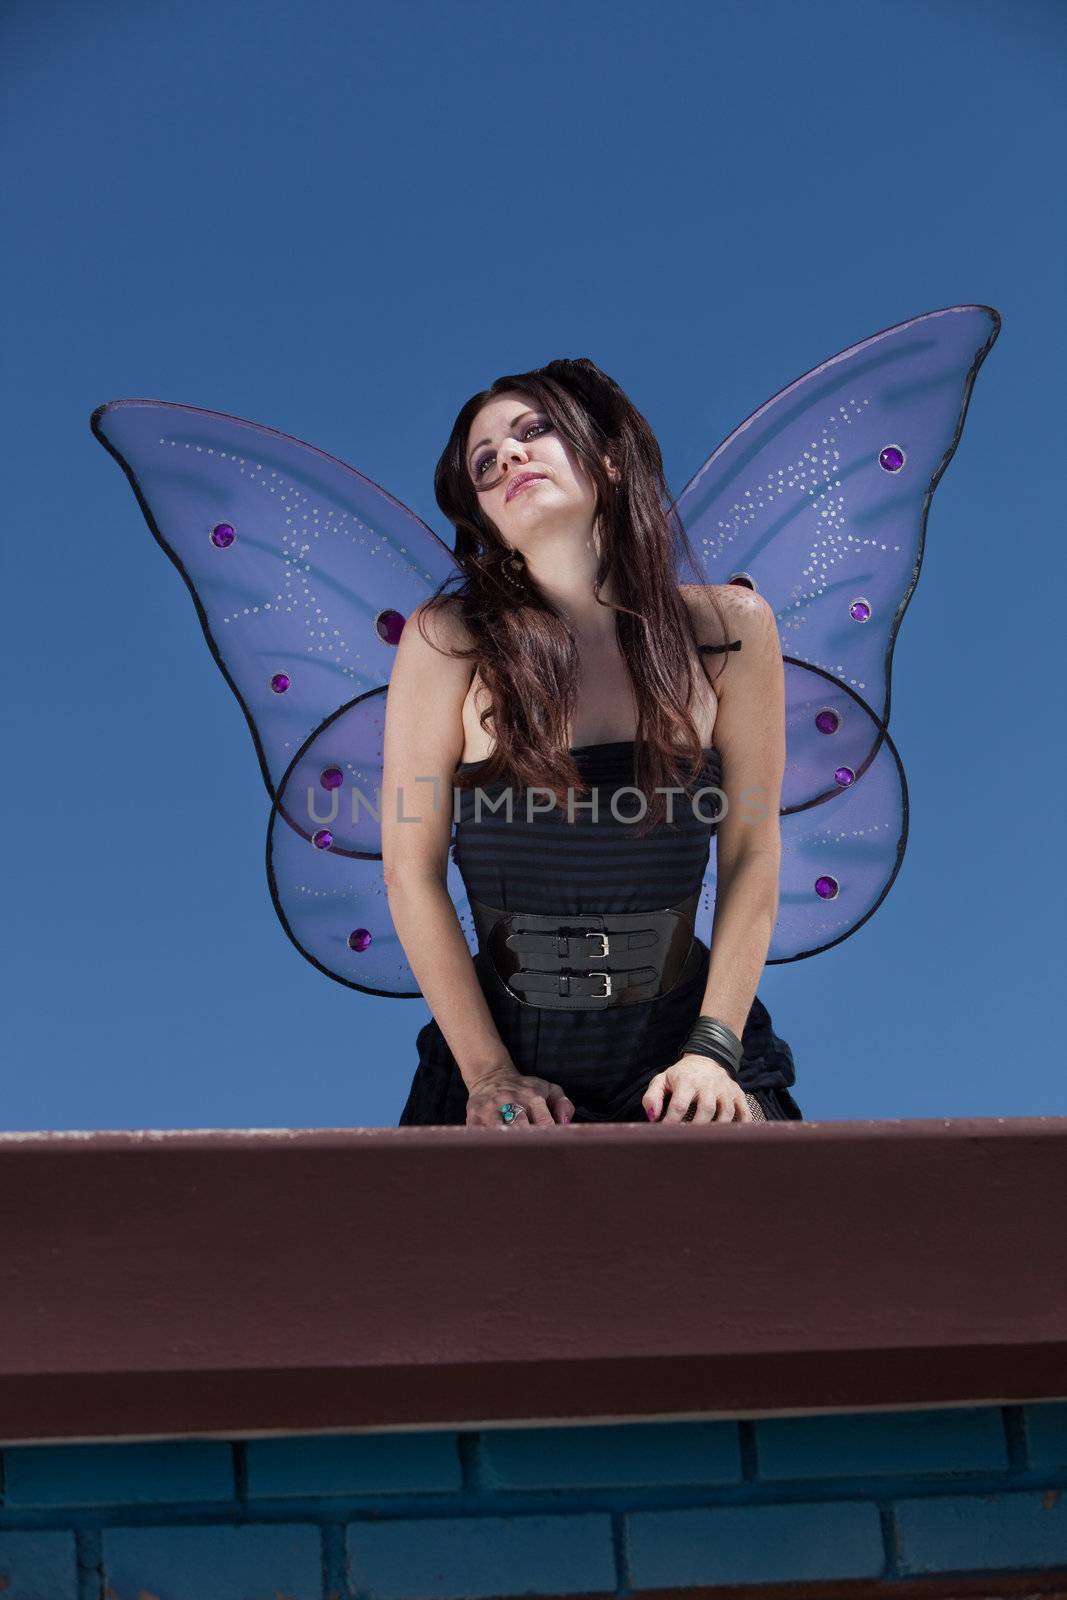 Faery looks out while standing outdoors on a rooftop